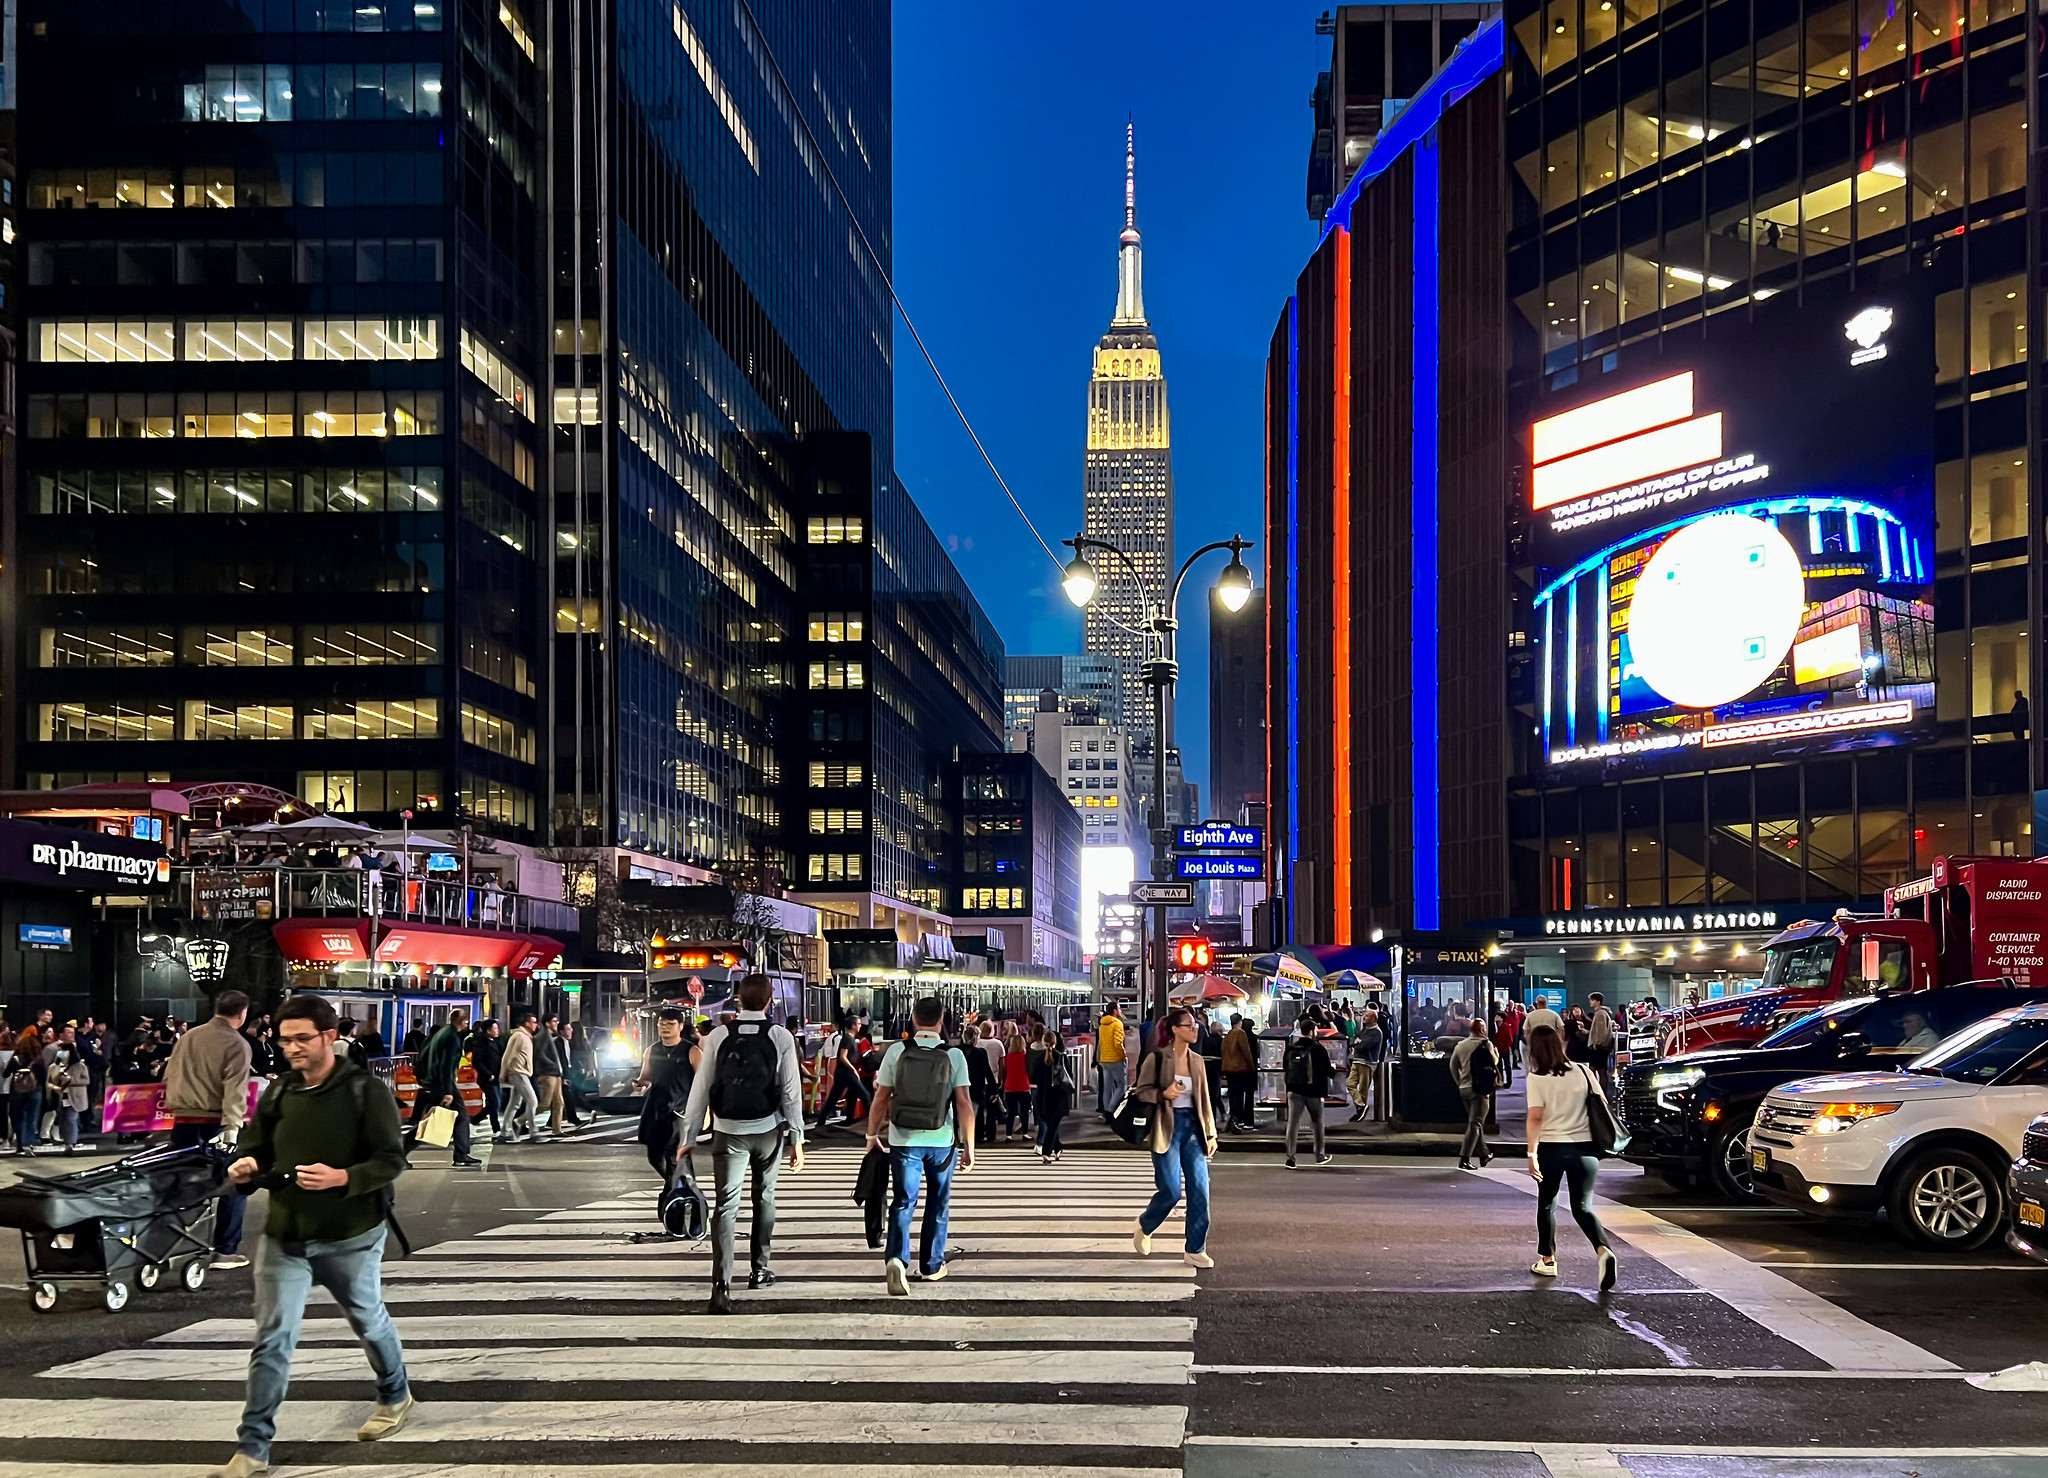 <p>Considering the sheer size of New York state, and the endless opportunities for tourism, choosing where you stay will have a great impact on your trip. These are the most common places to stay in New York:</p><p><strong>Upper East Side:</strong> Best for luxury shopping and culture; close to Central Park.</p><p><strong>Midtown Manhattan:</strong> Best for first-time visitors; easy walking and close to Times Square, Central Park, Broadway, Empire State Building, Rockefeller Center</p><p><strong>Lower East Side: </strong>Further from the main tourist area; close to Chinatown and Little Italy</p><p><strong>Harlem: </strong>Best for Black history and culture; close to the Apollo Theater</p><p>Andreas Komodromos, Flickr</p>